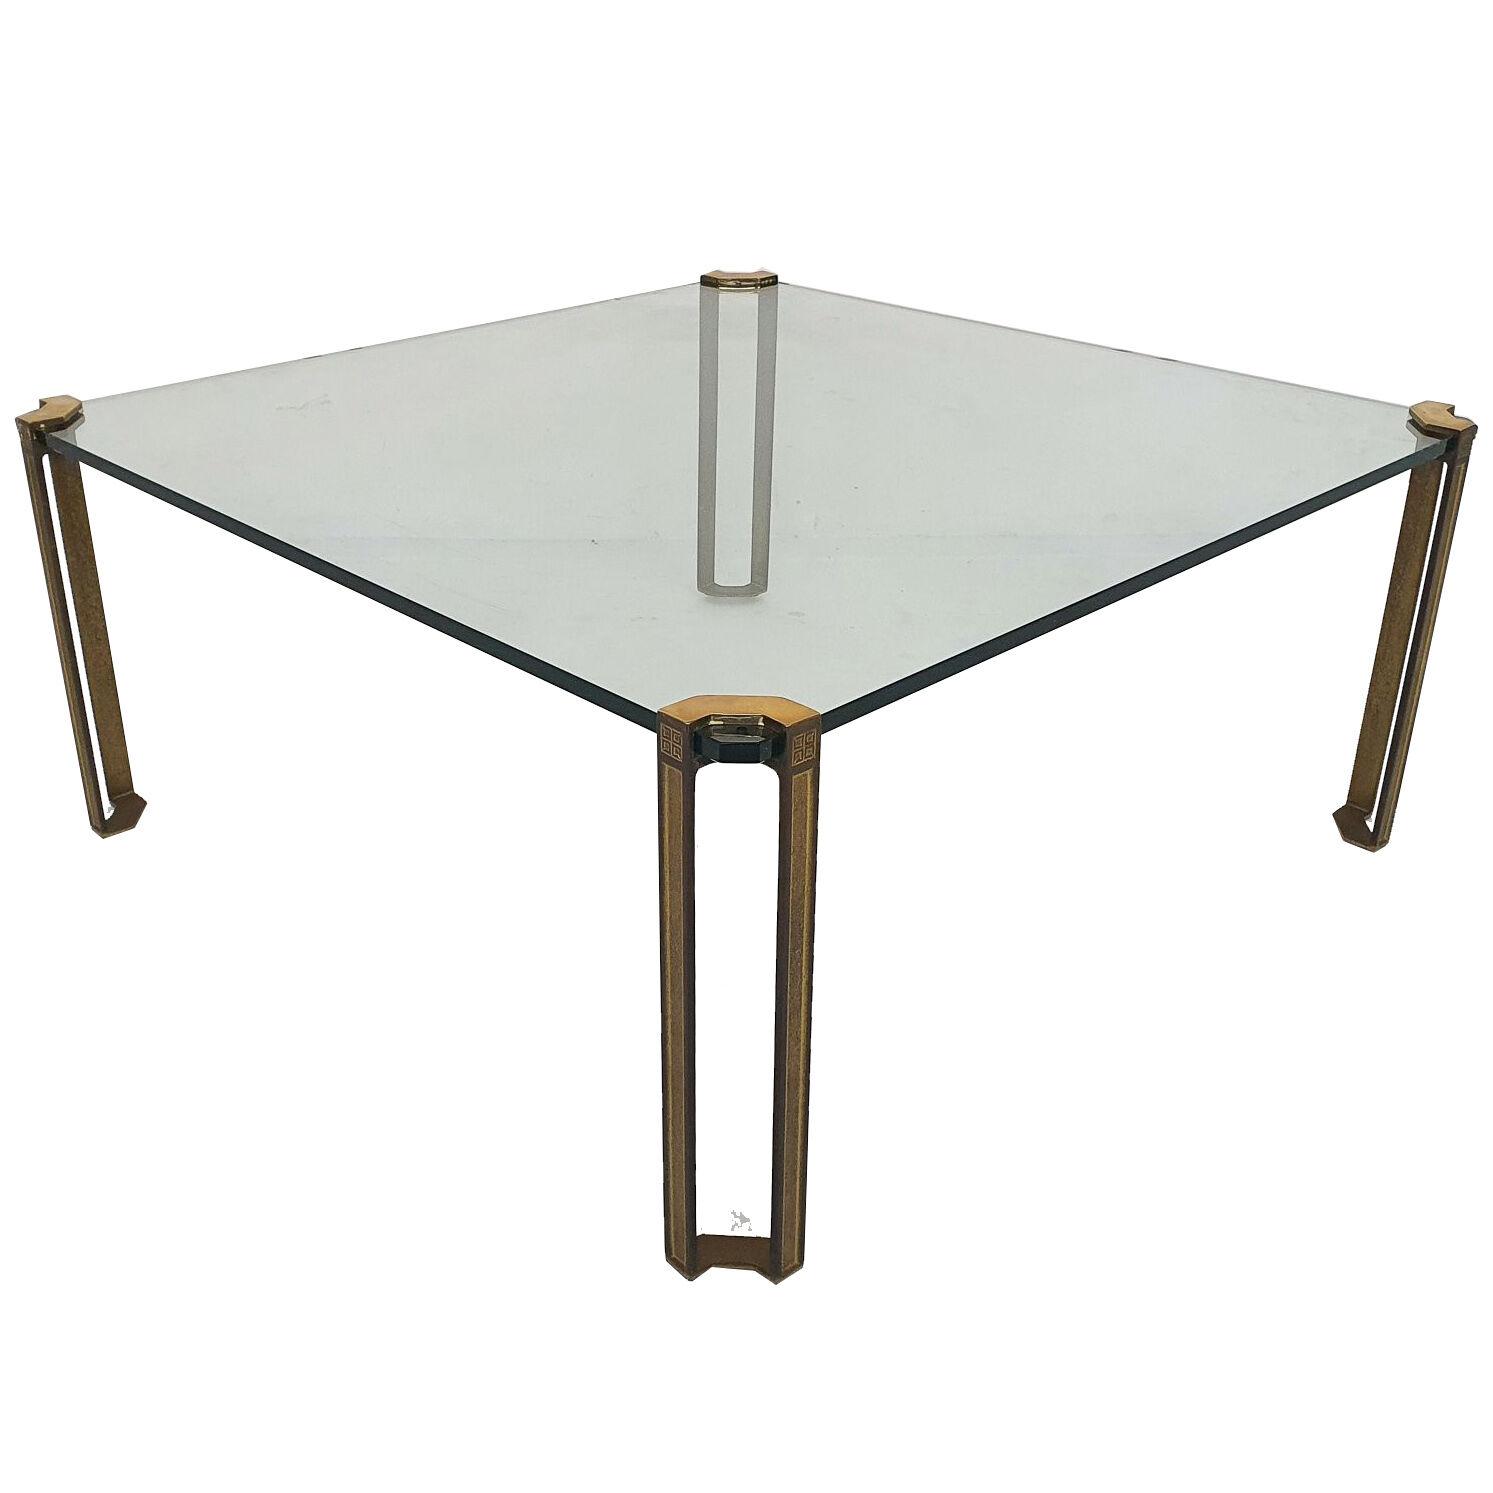 Peter Ghyczy for Ghyczy brass and glass square coffee table, 1970's